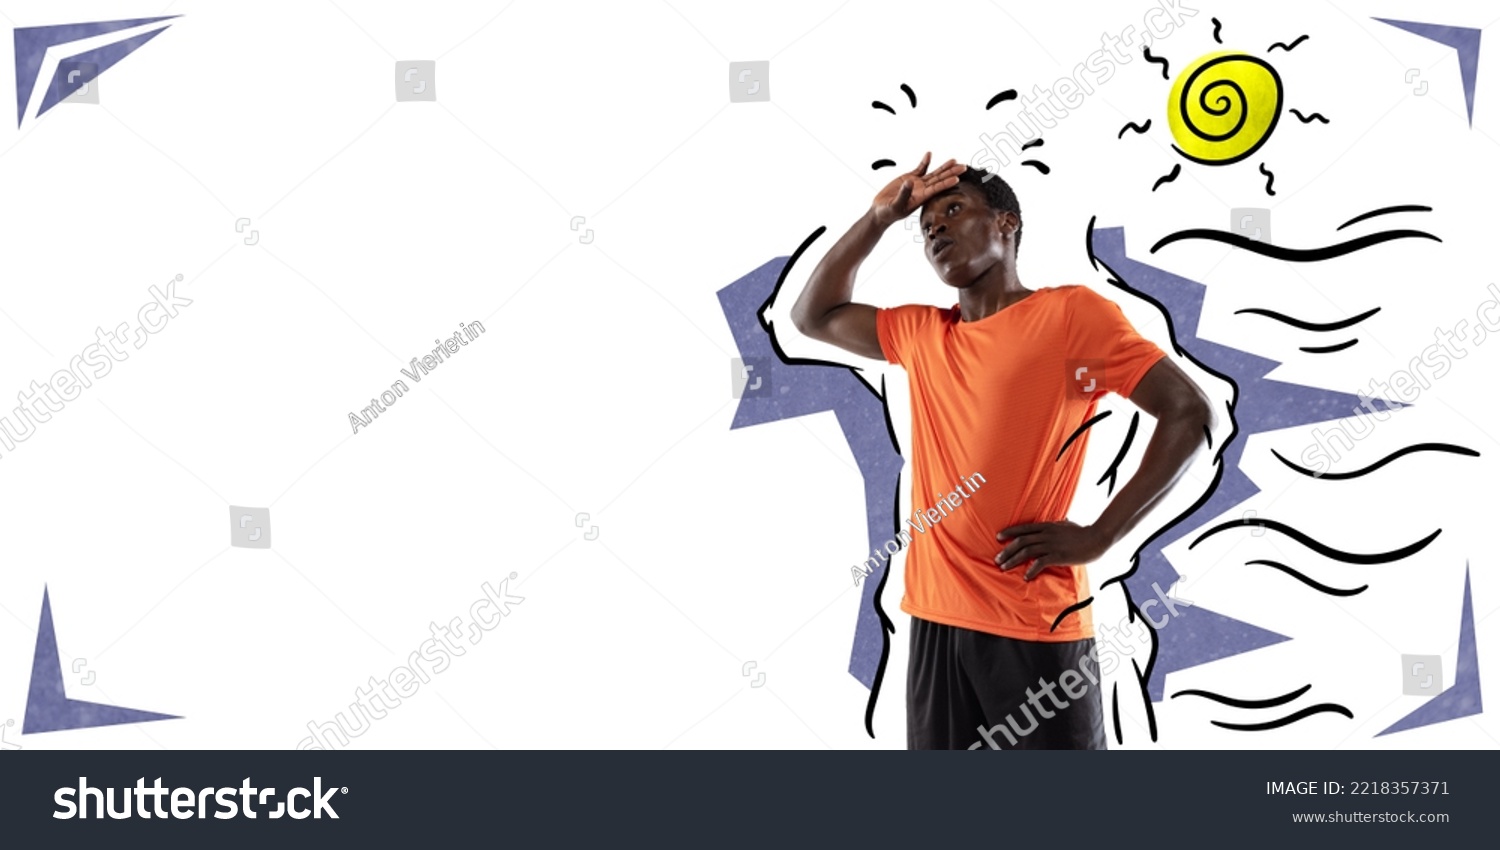 Contemporary art collage. Creative design, Young sportive sweating man resting after run. Drawn sun and wind. Concept of creativity, sport, doodle art, strength, motivation. Flyer #2218357371